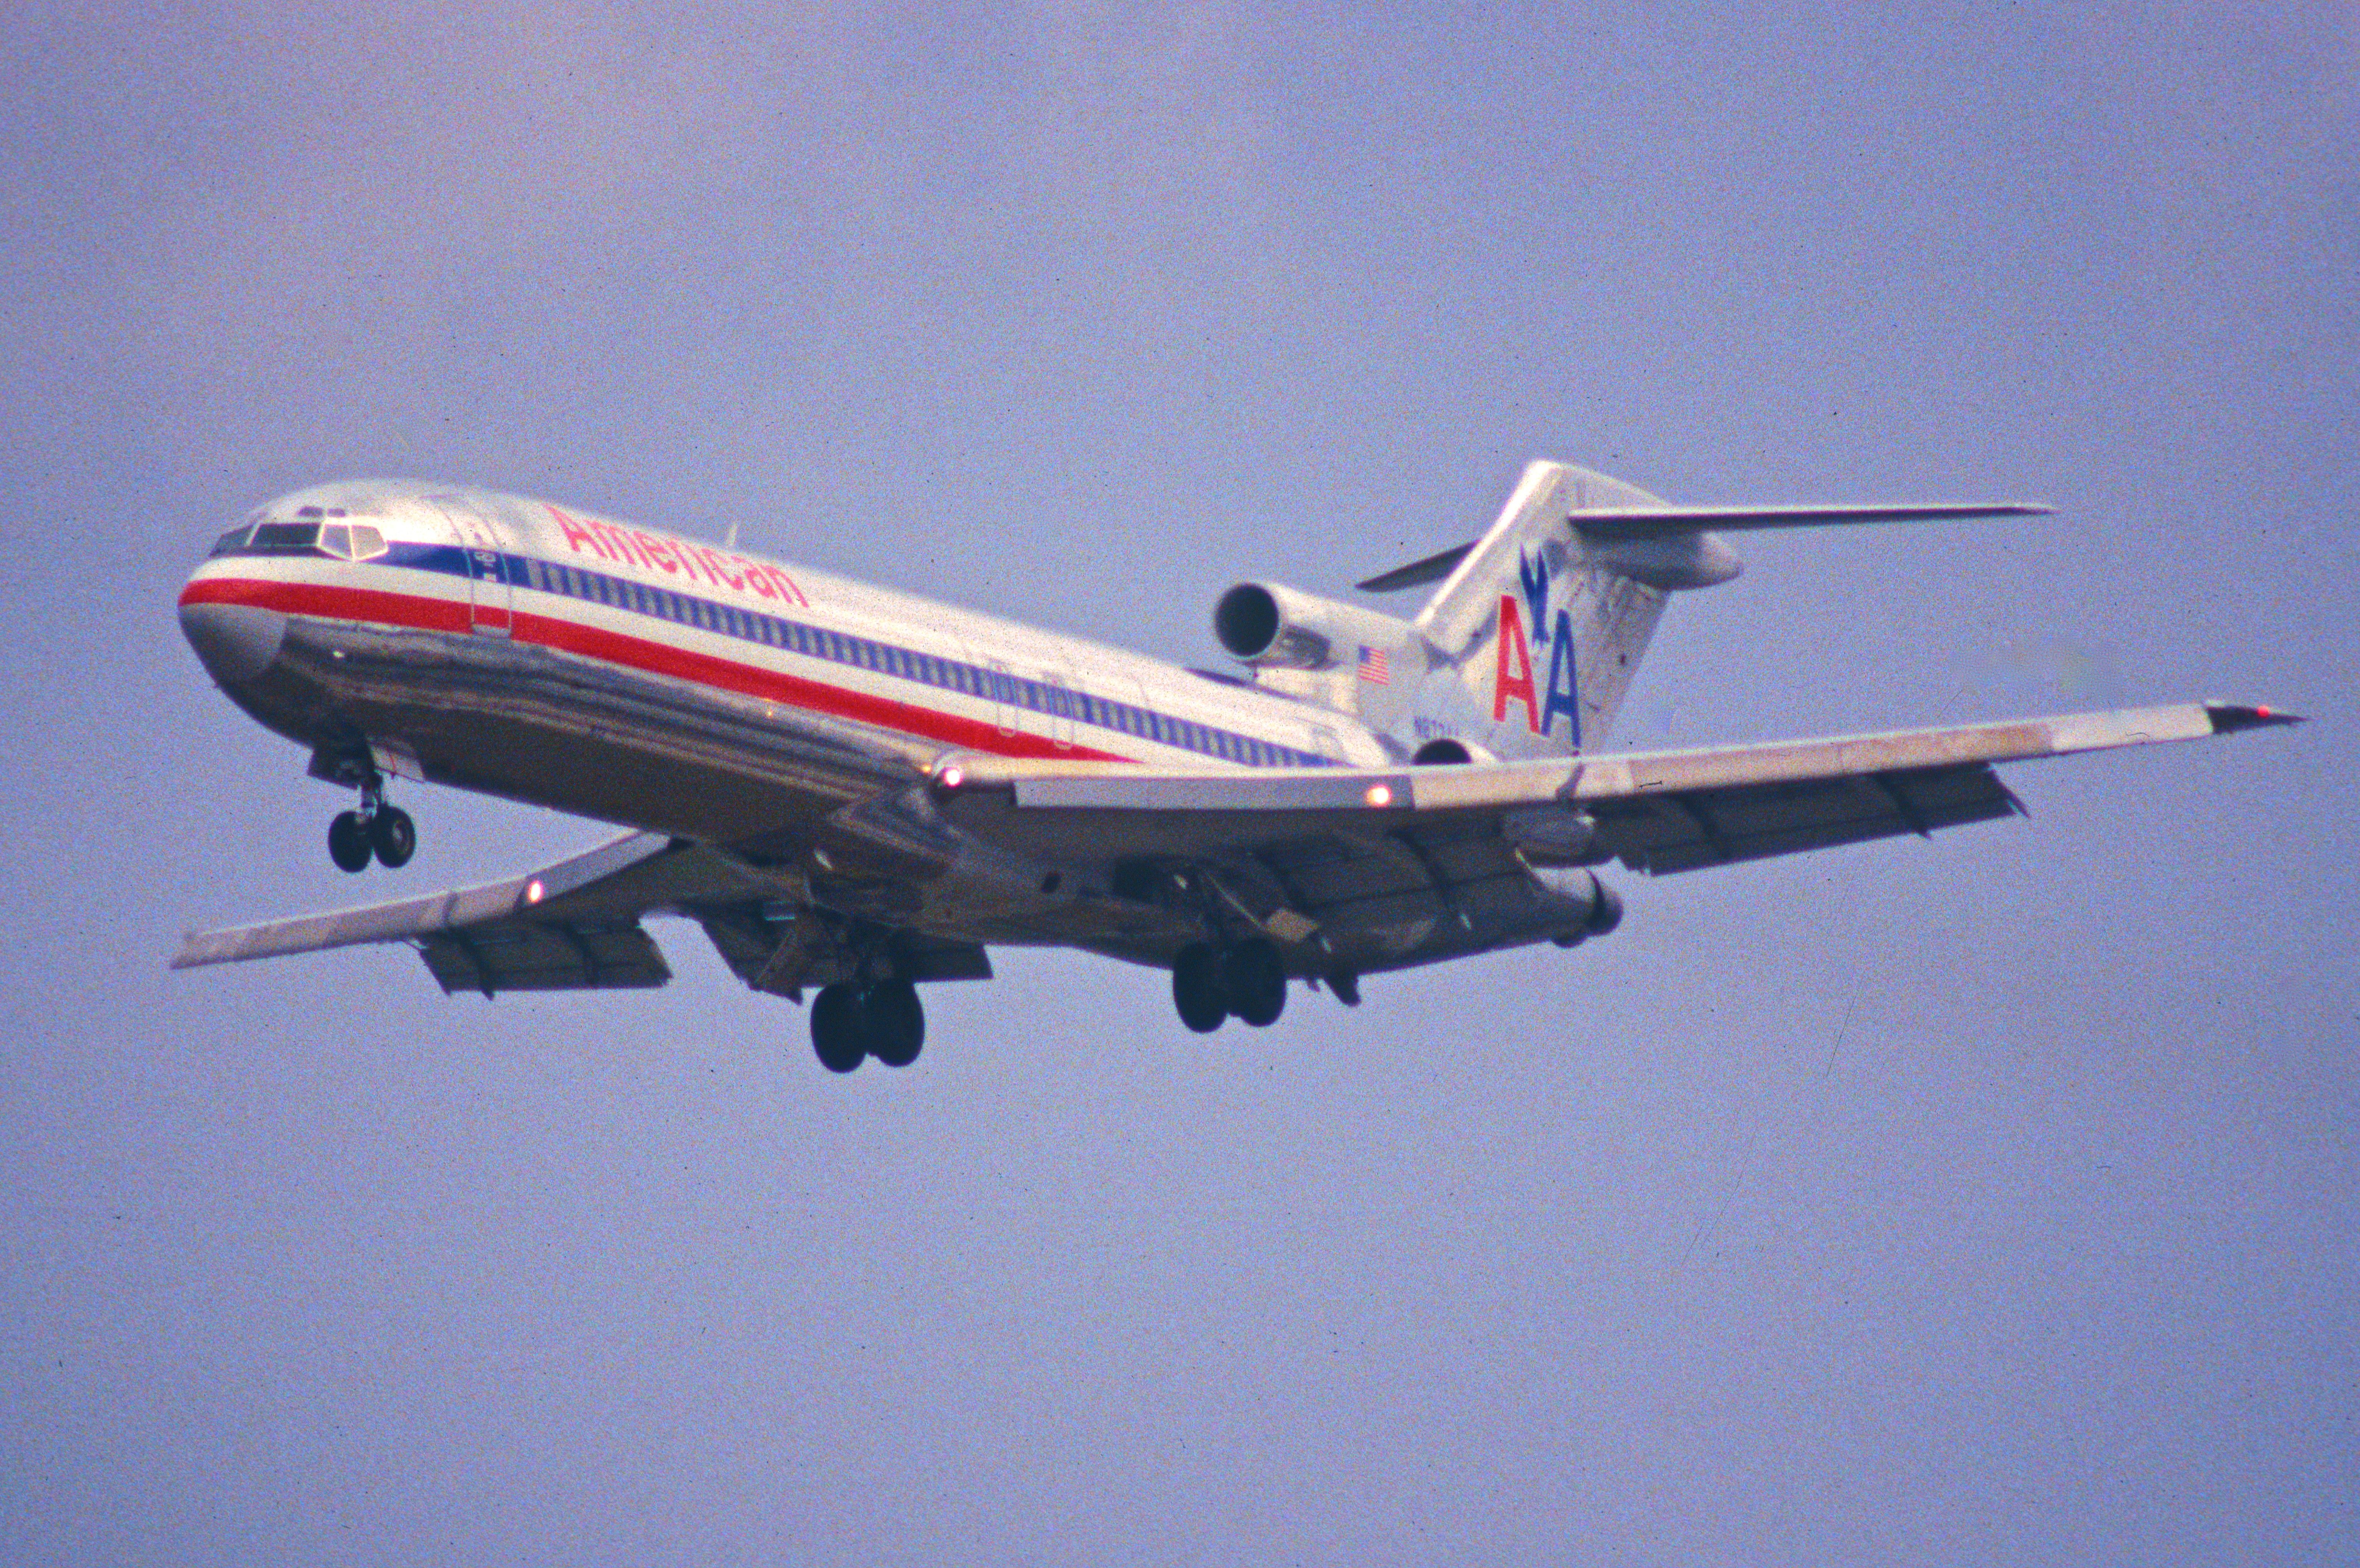 An American Airlines Boeing 727-200 flying in the sky.